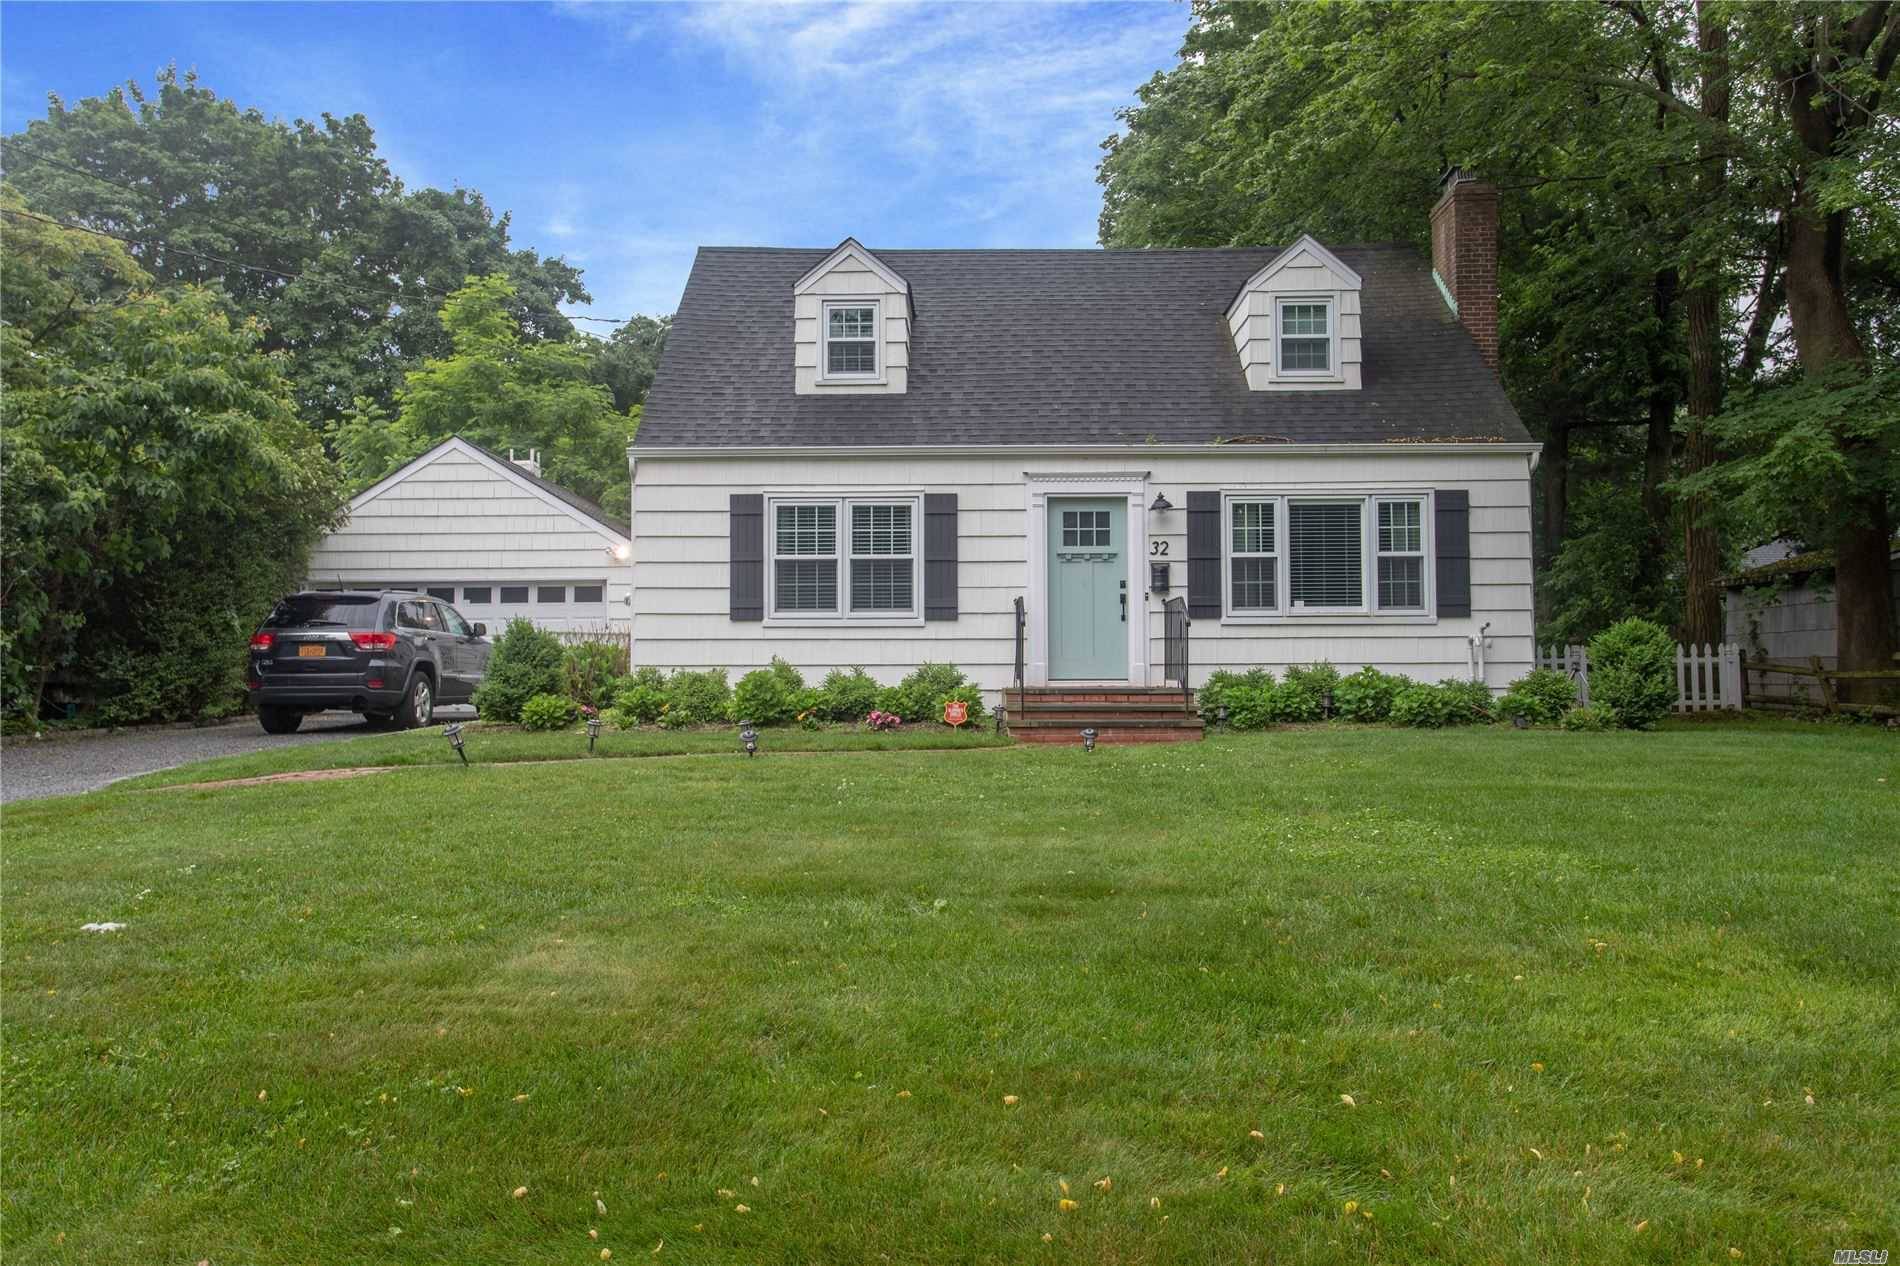 Turn Key Living In This Recently Renovated Expanded Cape W Newer Granite EIK, Including Energy Star Appliances, Newer Baths, Newer Heating And CAC 2016, Newer Roof, Newer Windows, Gleaming Hardwood ...